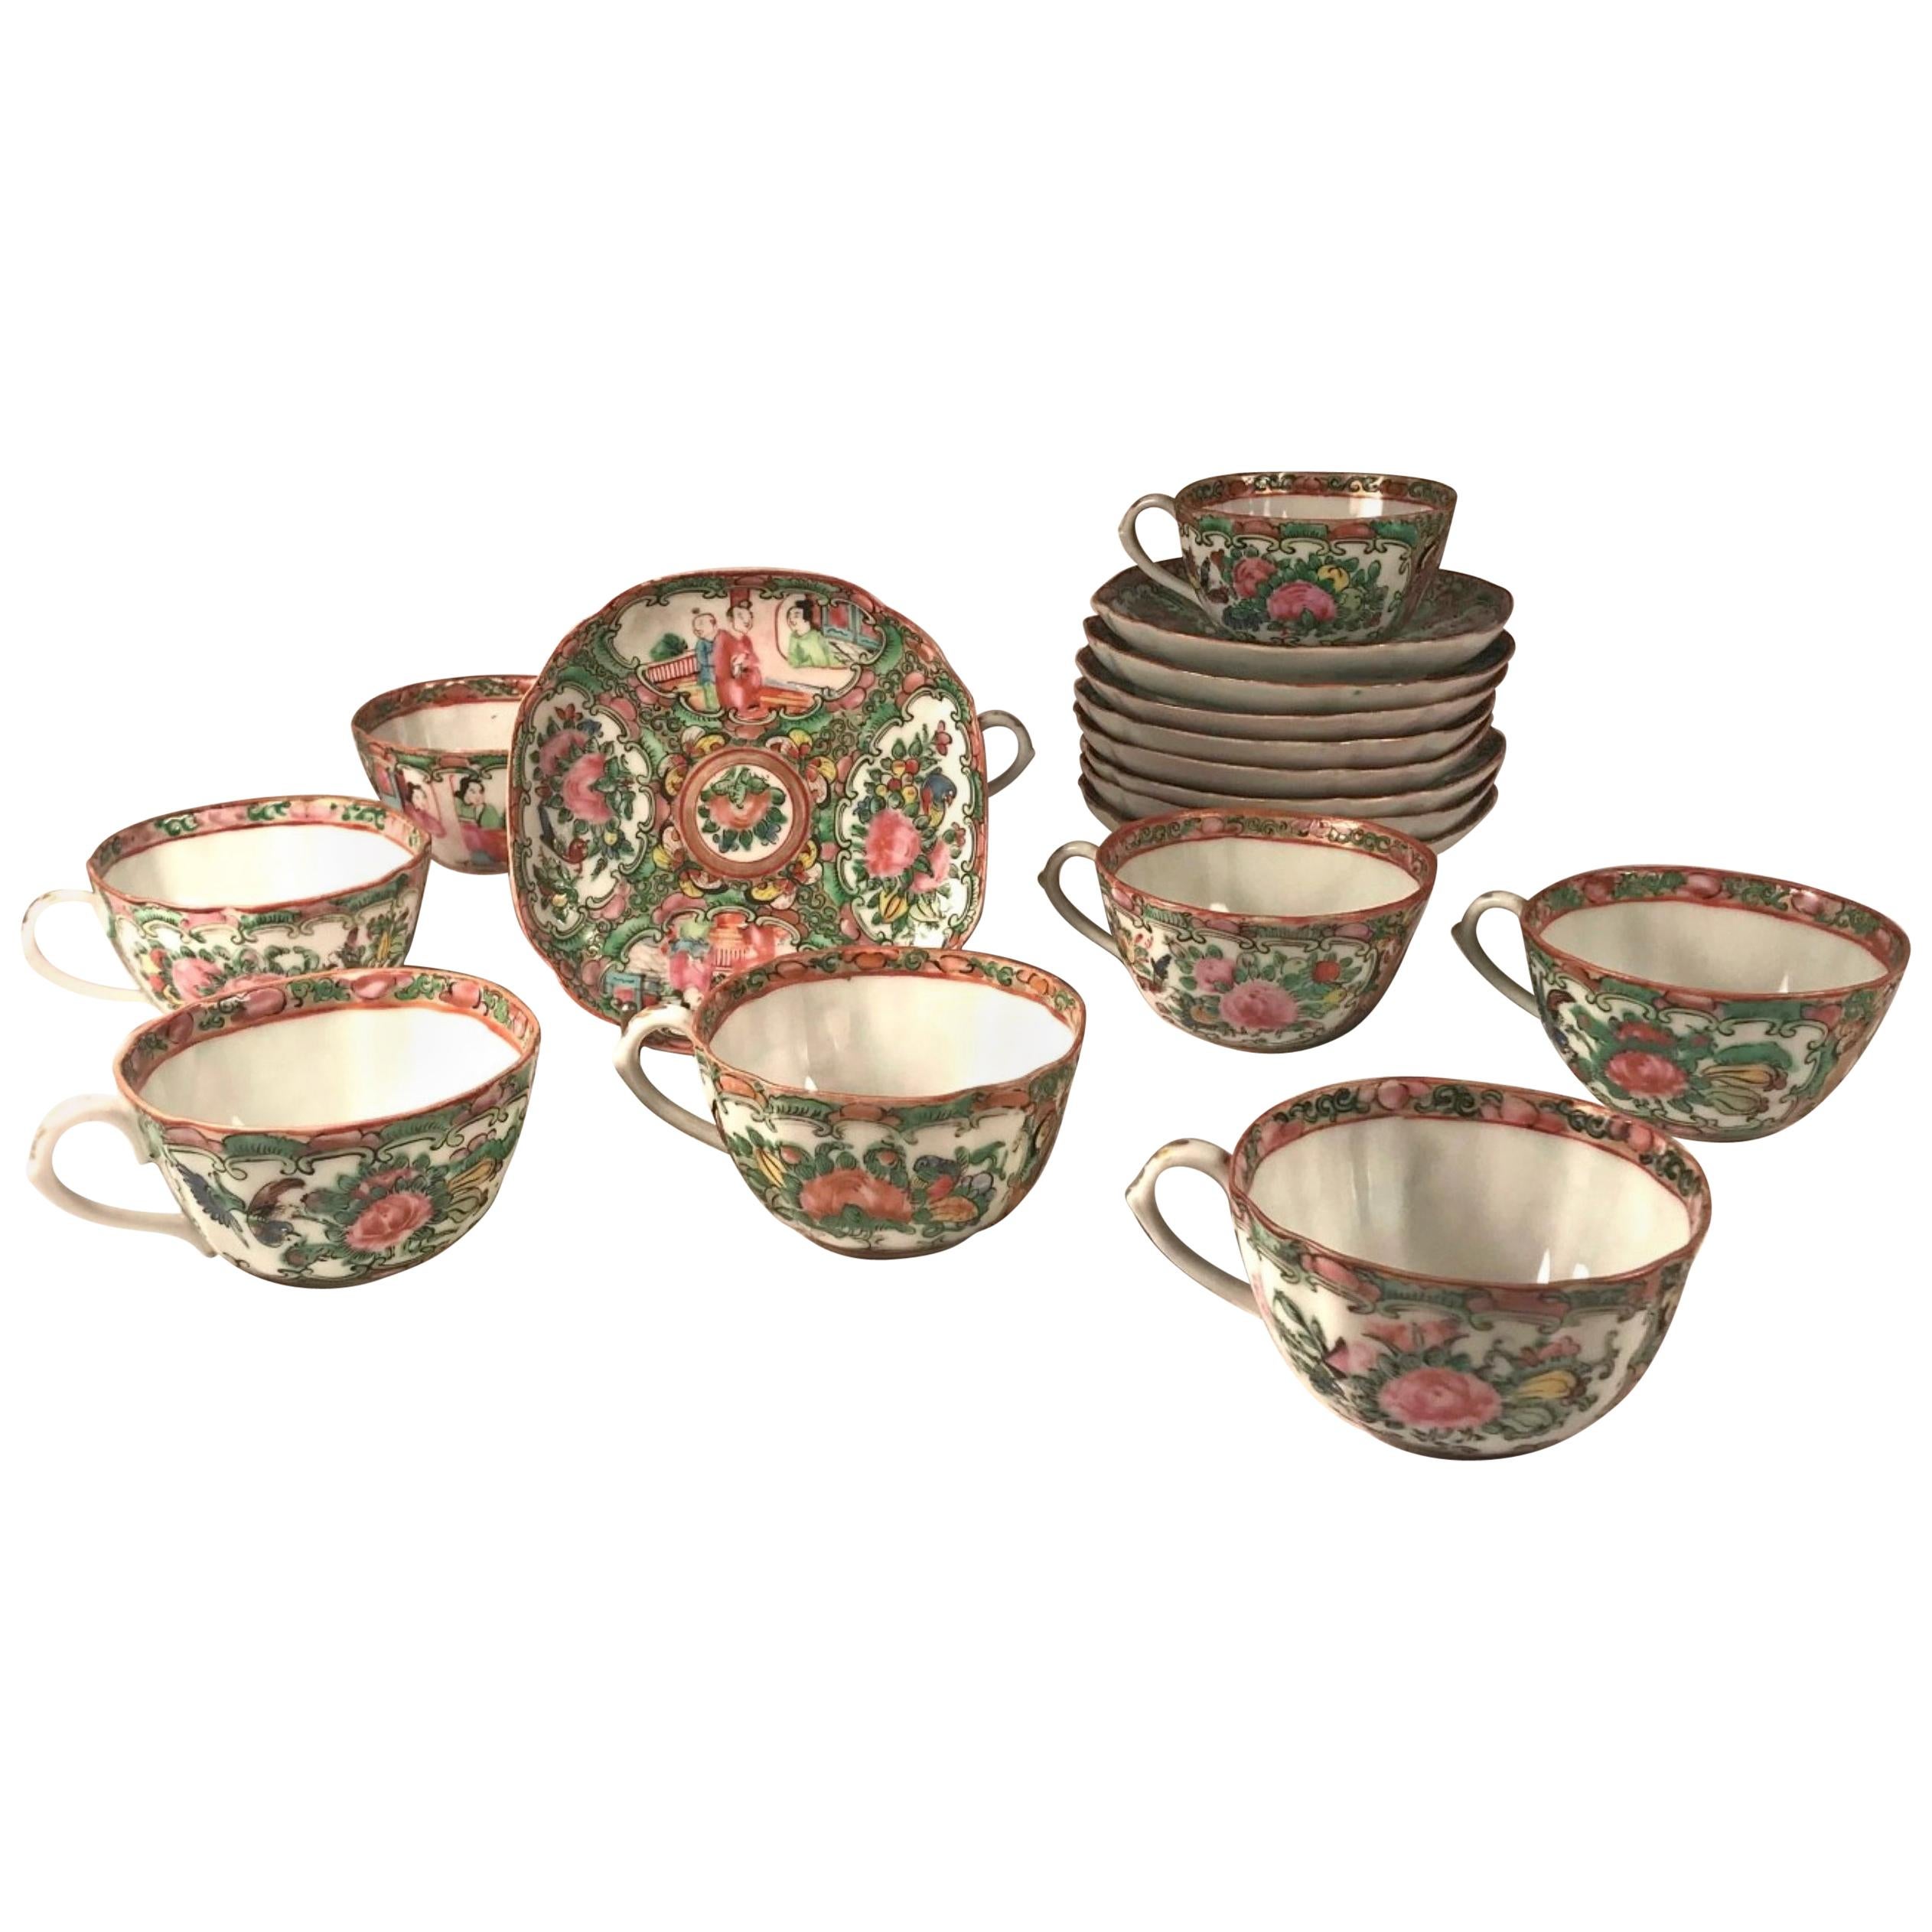 19th Century Rose Medallion Set of 9 Cups and Saucers